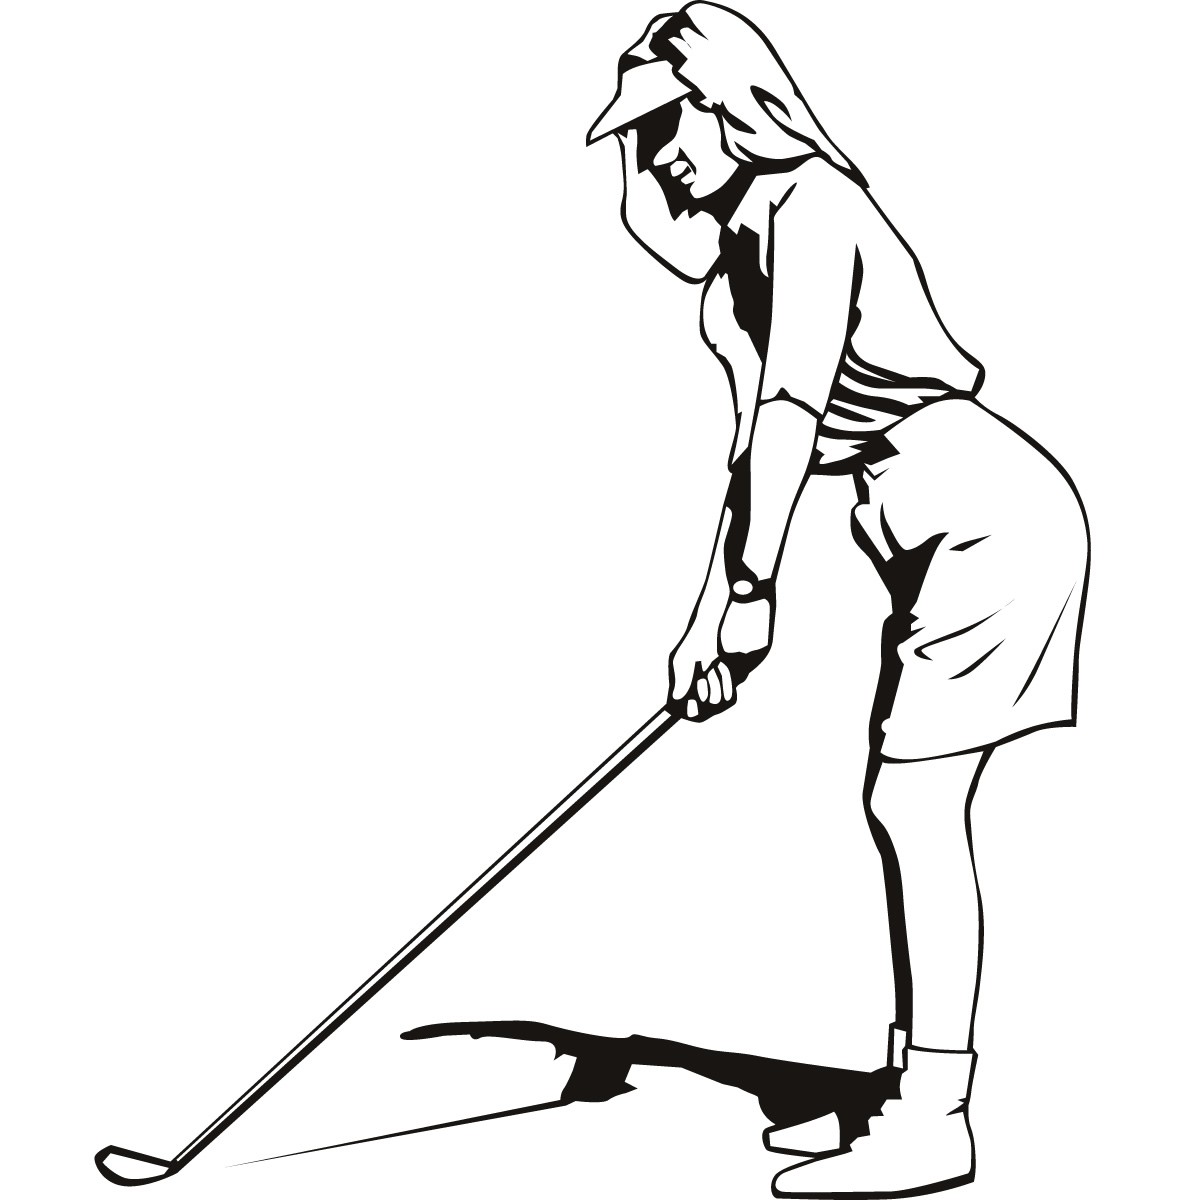 Free Lady Golfer Images, Download Free Lady Golfer Images png images